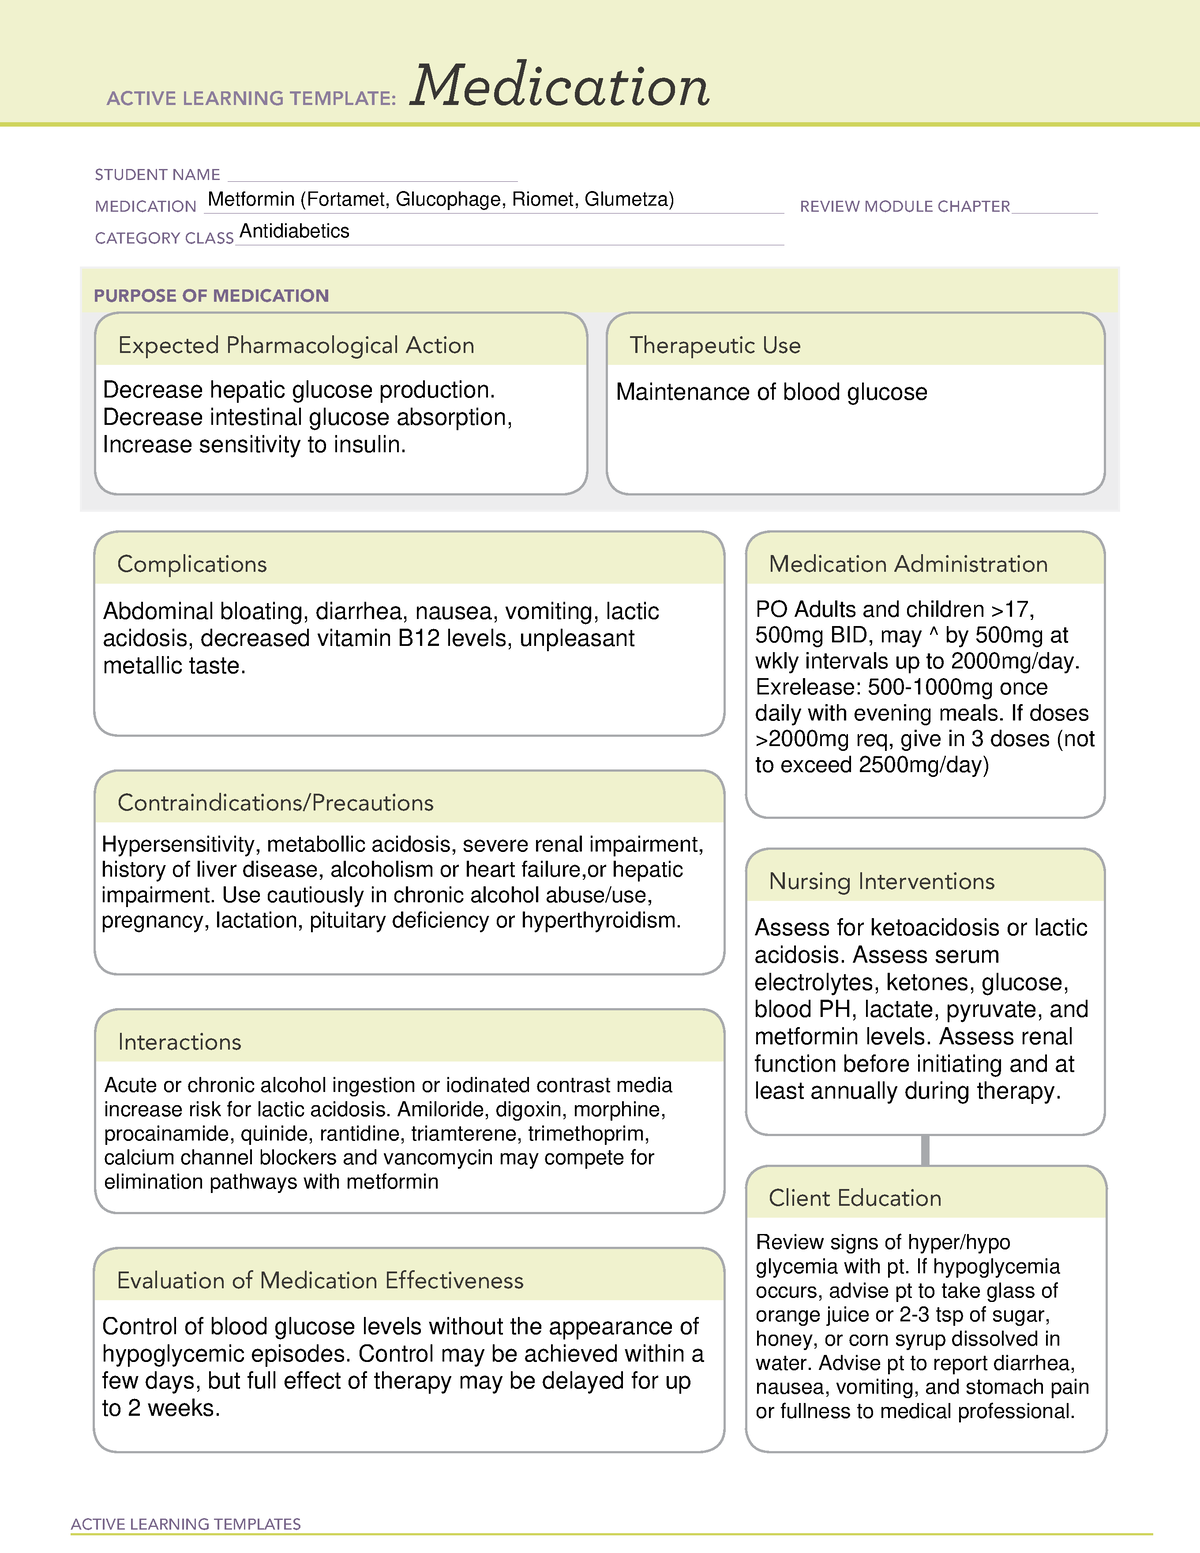 Metformin Glucophage Antidiabetic ACTIVE LEARNING TEMPLATES